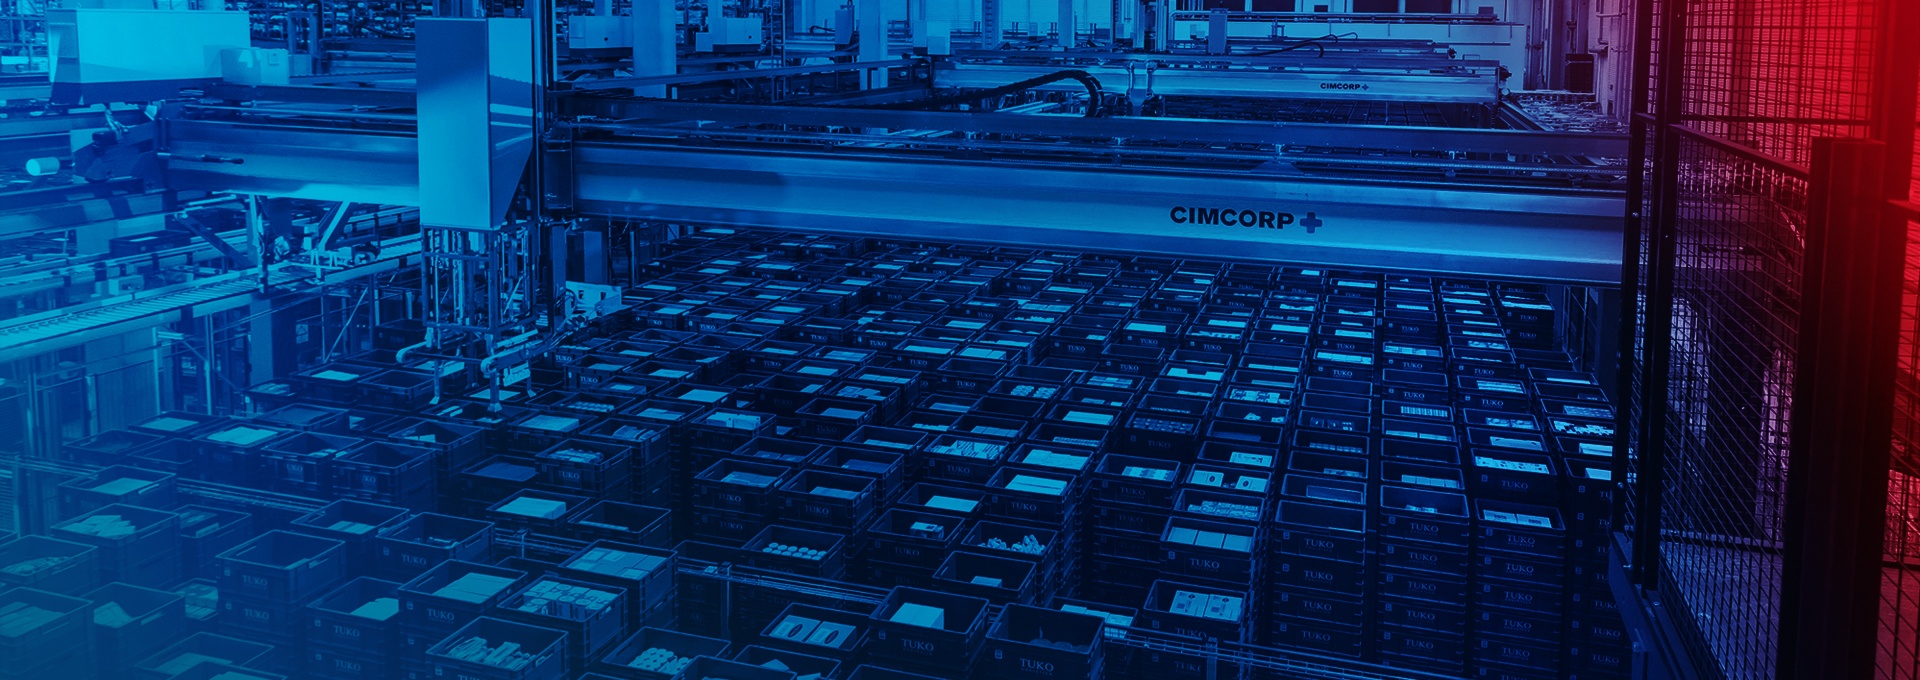 CIMCORP gantry robot sorts boxes in a warehouse